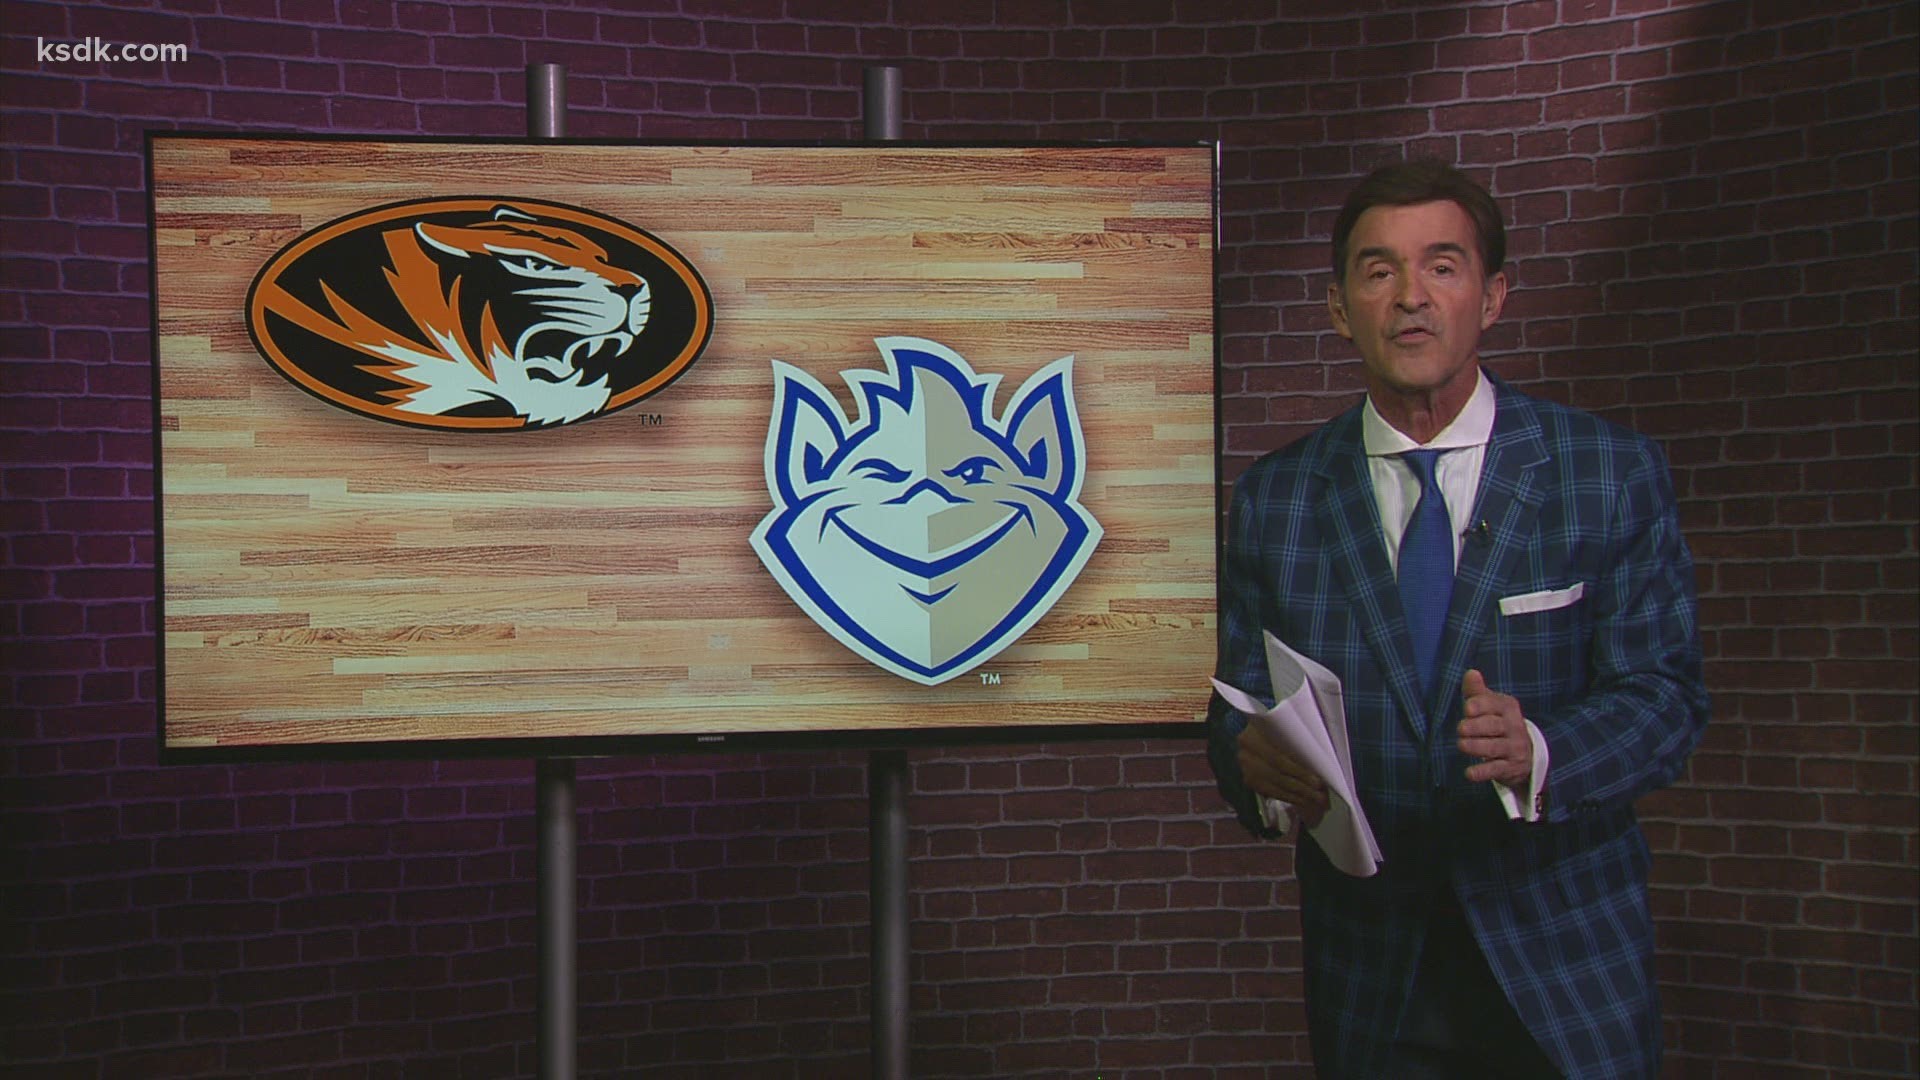 It makes too much sense, especially in these COVID-19 times. The Billikens and Tigers need to play this season.